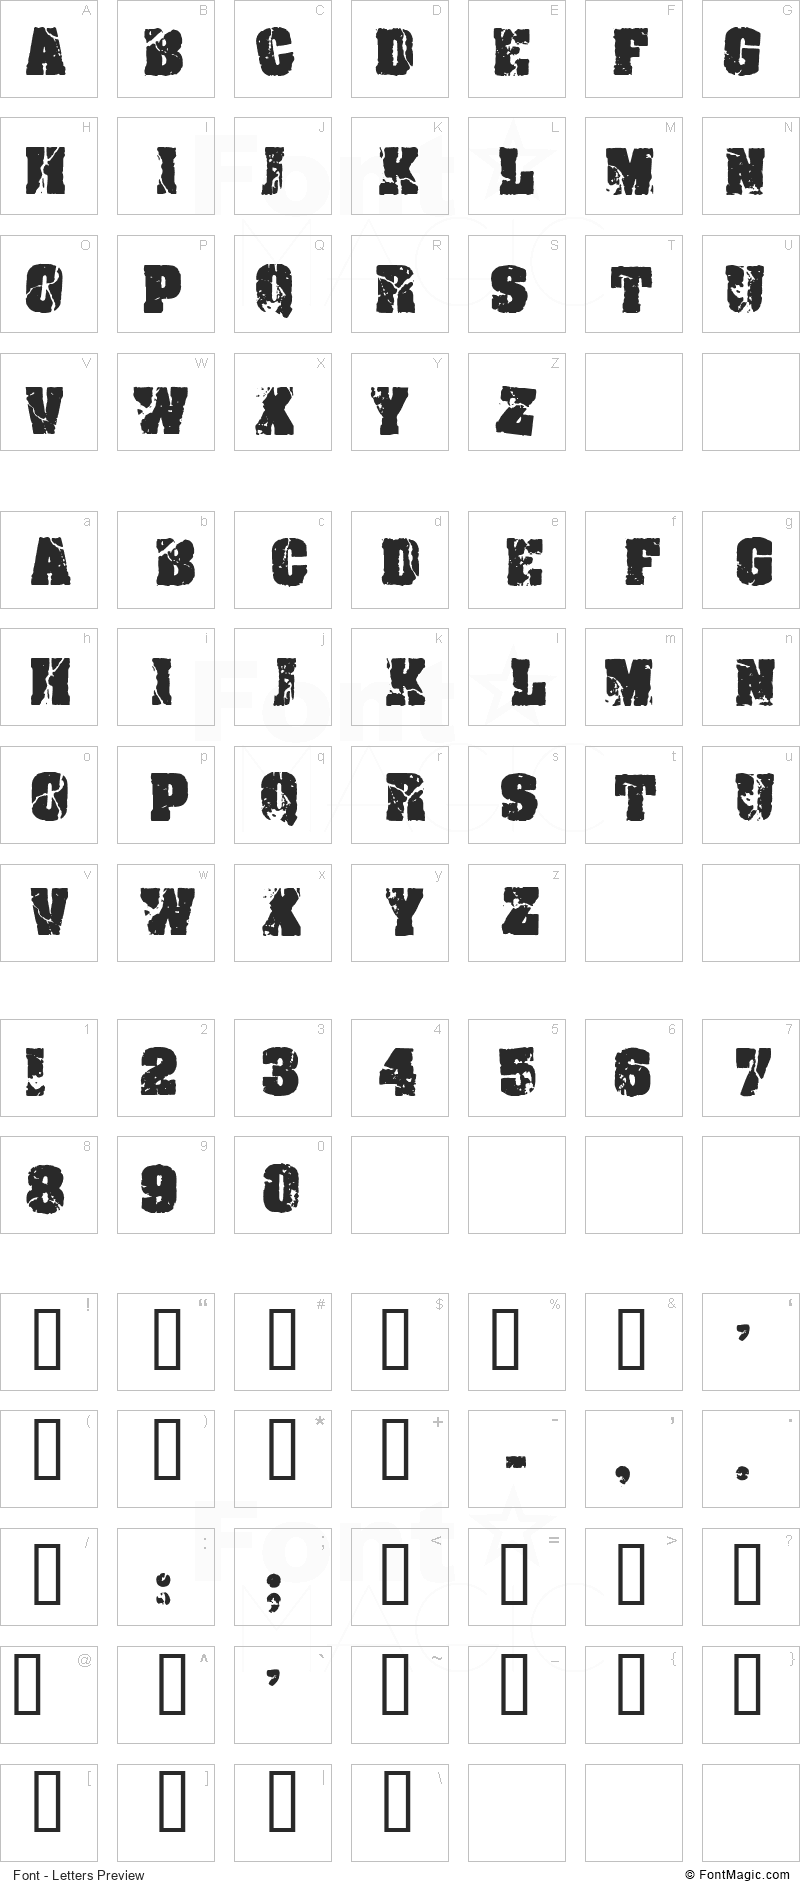 CF Crack and Bold Font - All Latters Preview Chart